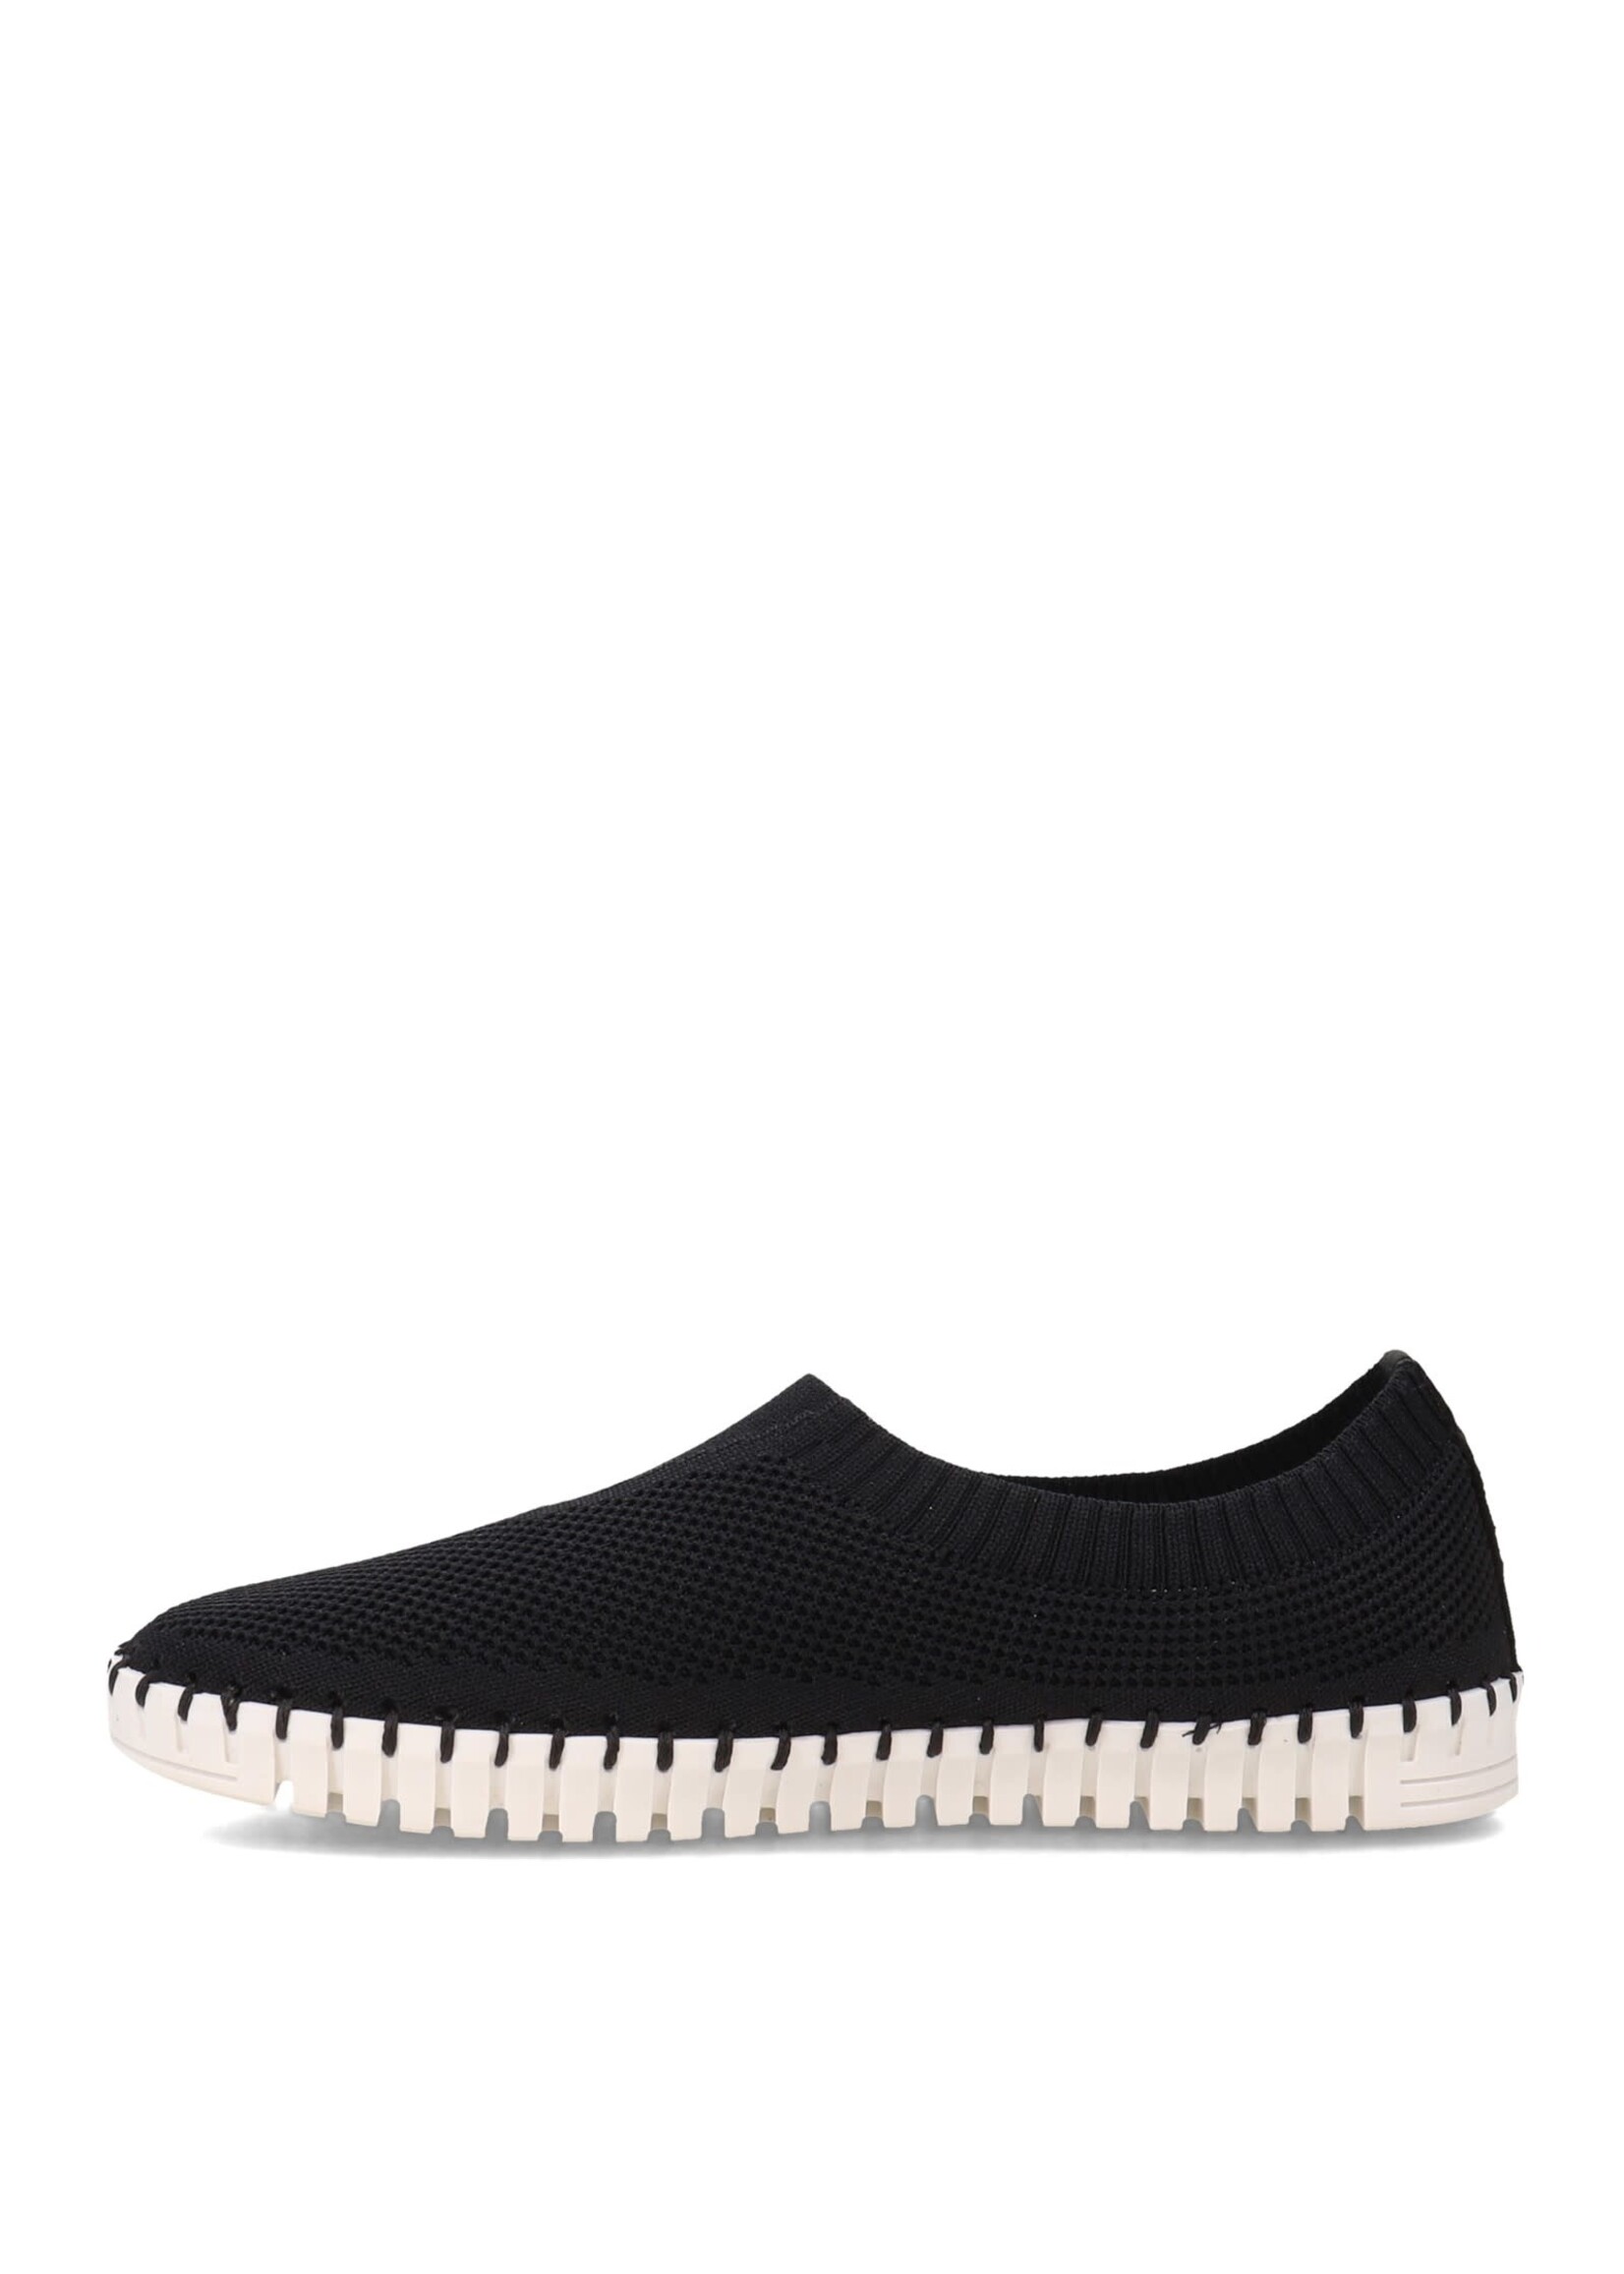 Eric Michael Lucy Black Slip On by Eric Michaels